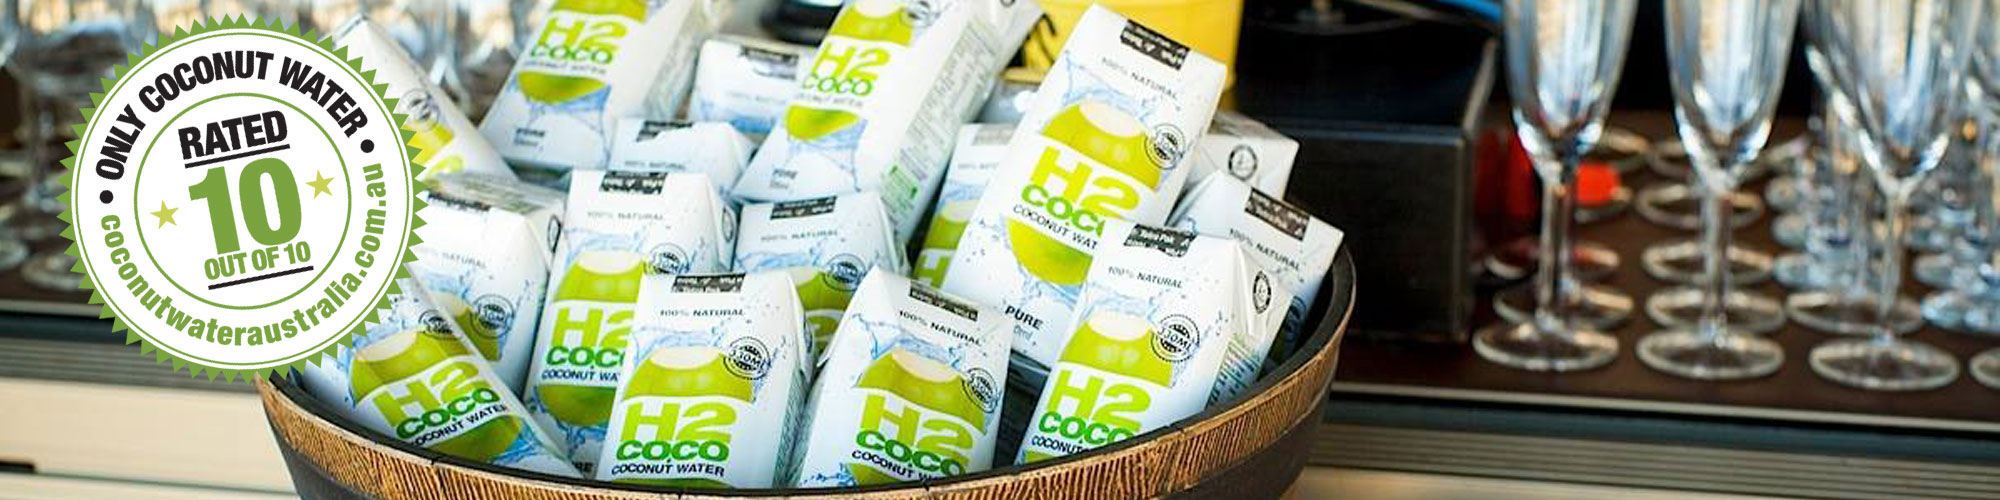 H2 Coconut water